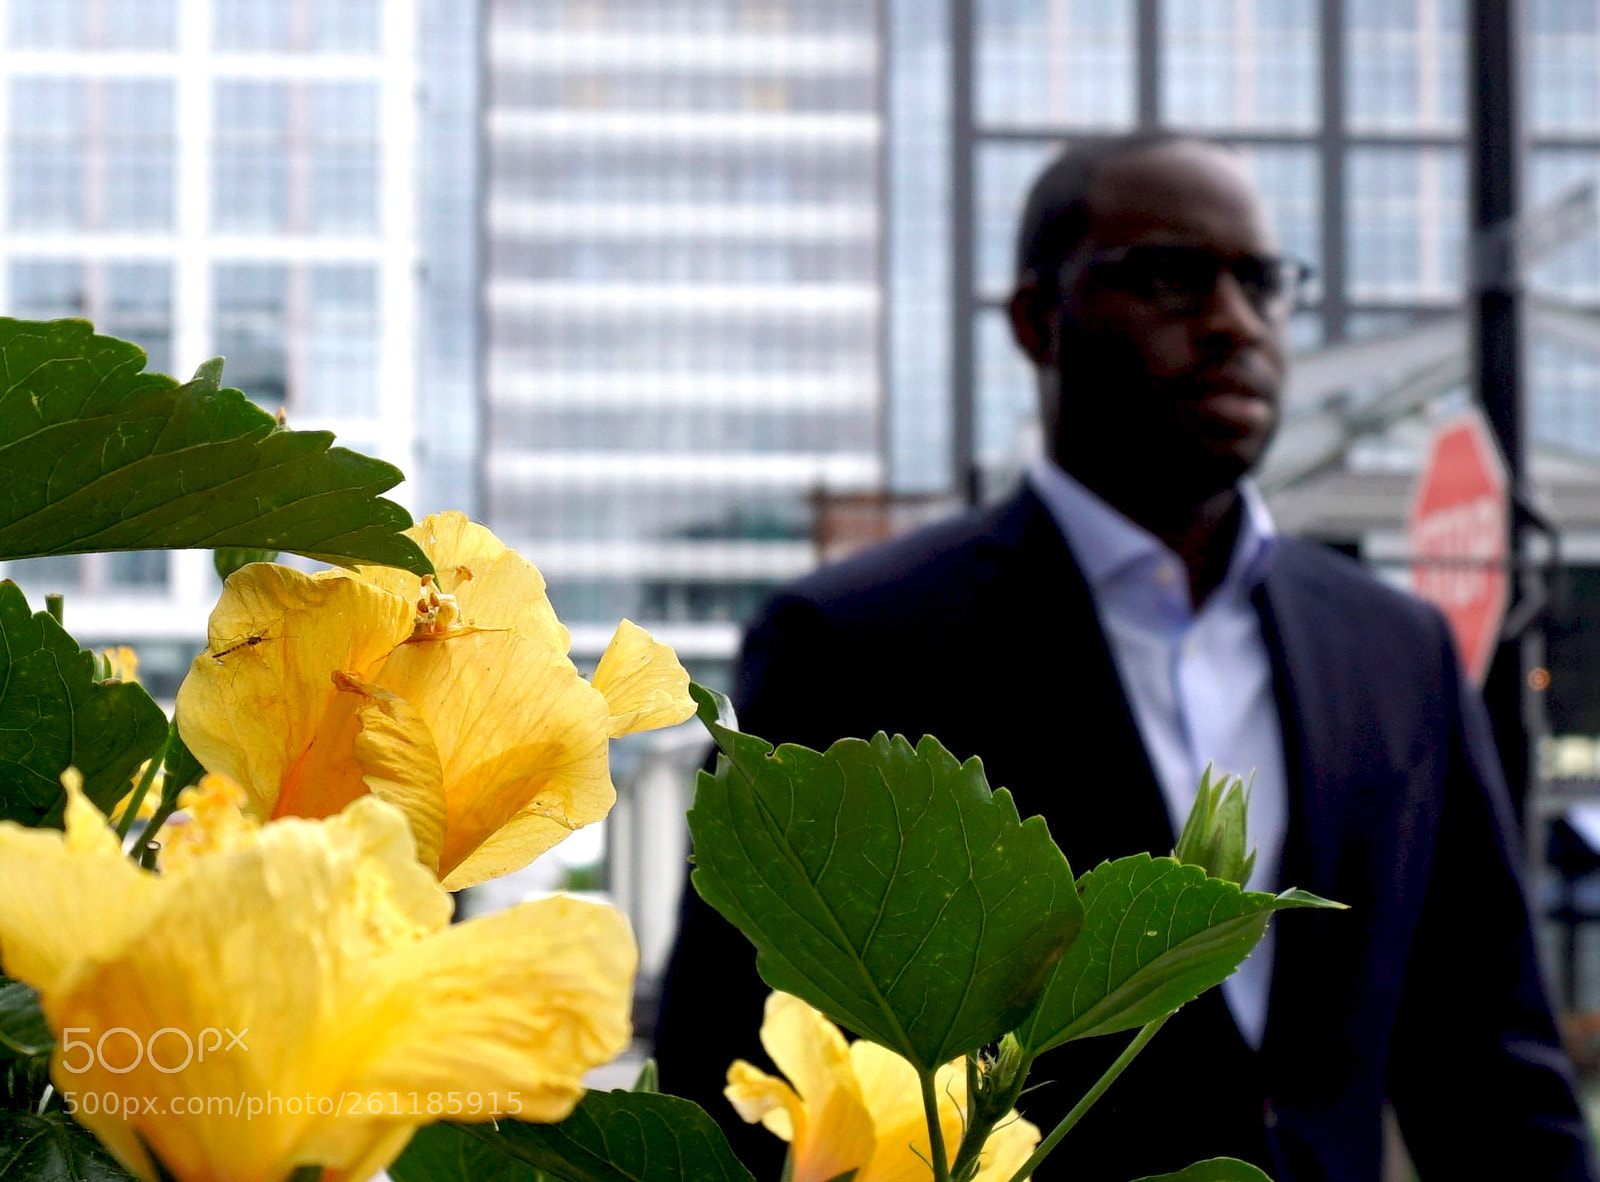 Sony a6500 sample photo. Man passes a flower photography